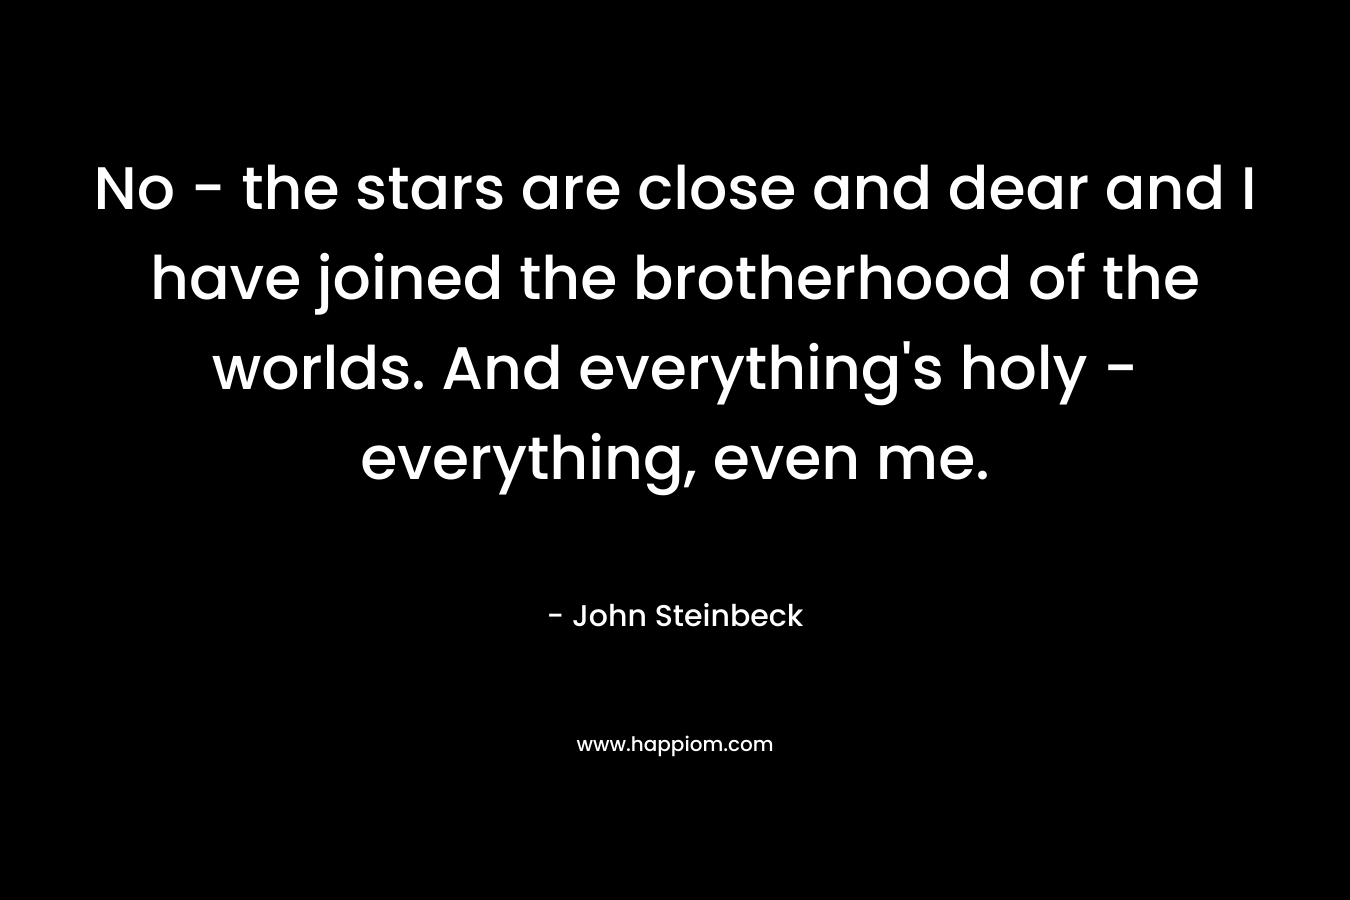 No – the stars are close and dear and I have joined the brotherhood of the worlds. And everything’s holy – everything, even me. – John Steinbeck